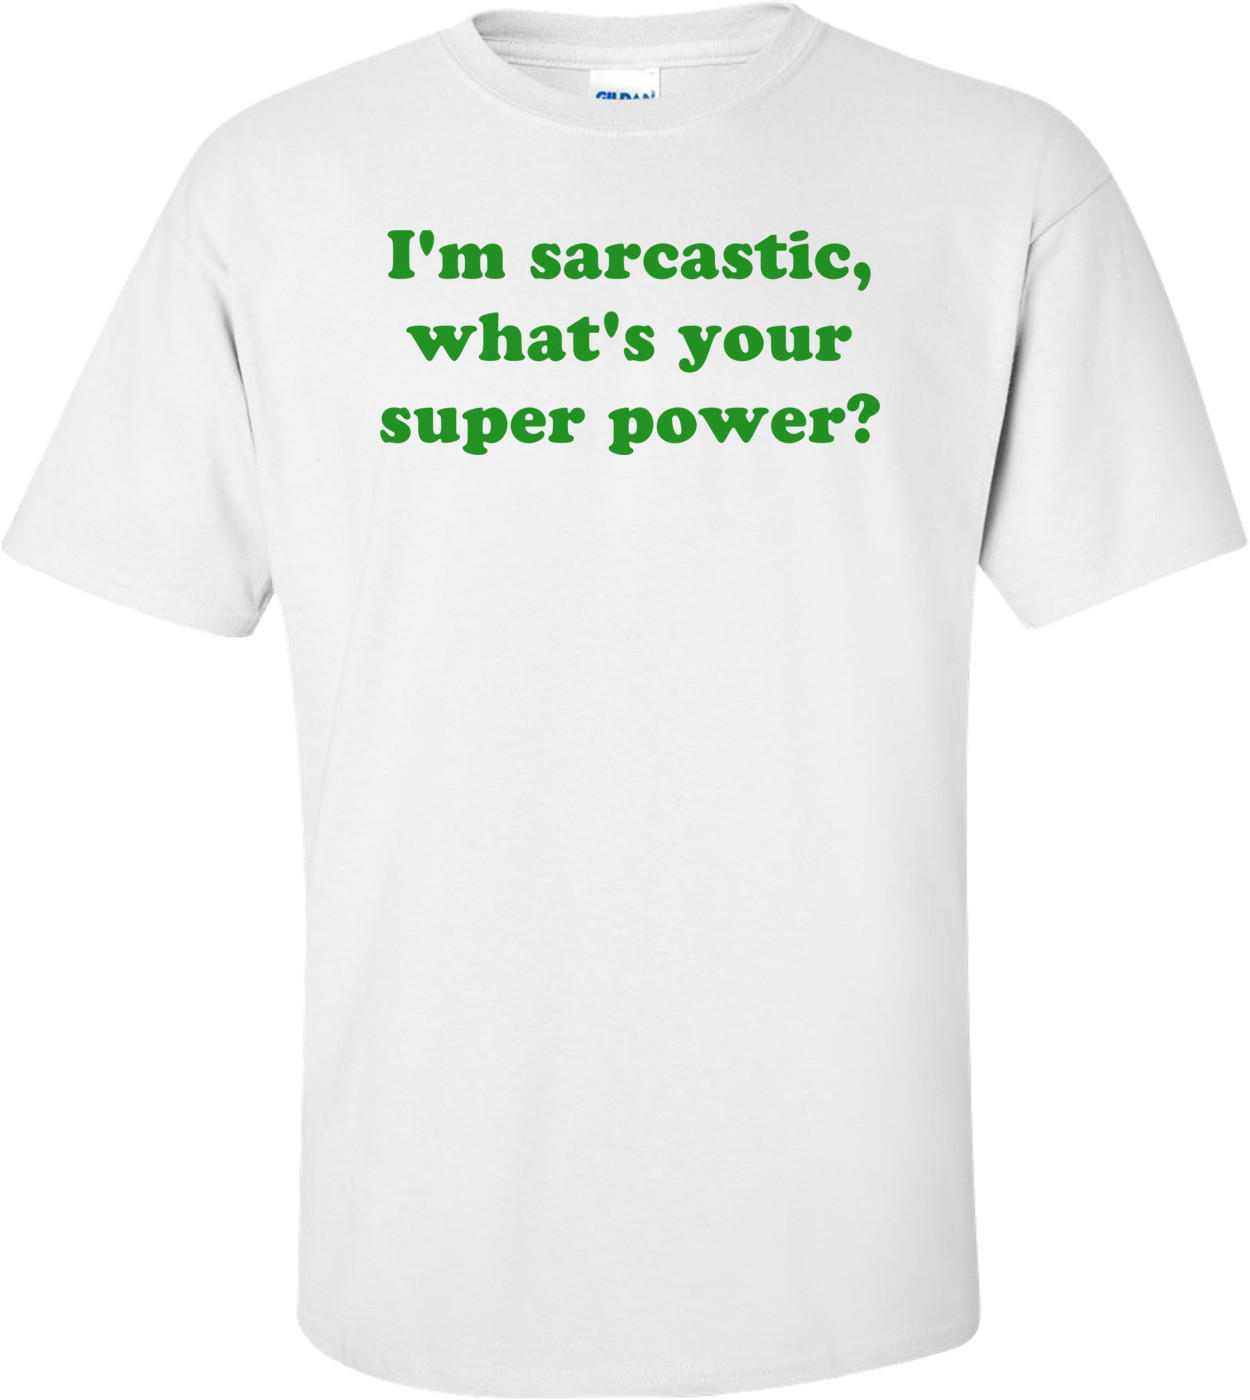 I'm sarcastic, what's your super power? Shirt